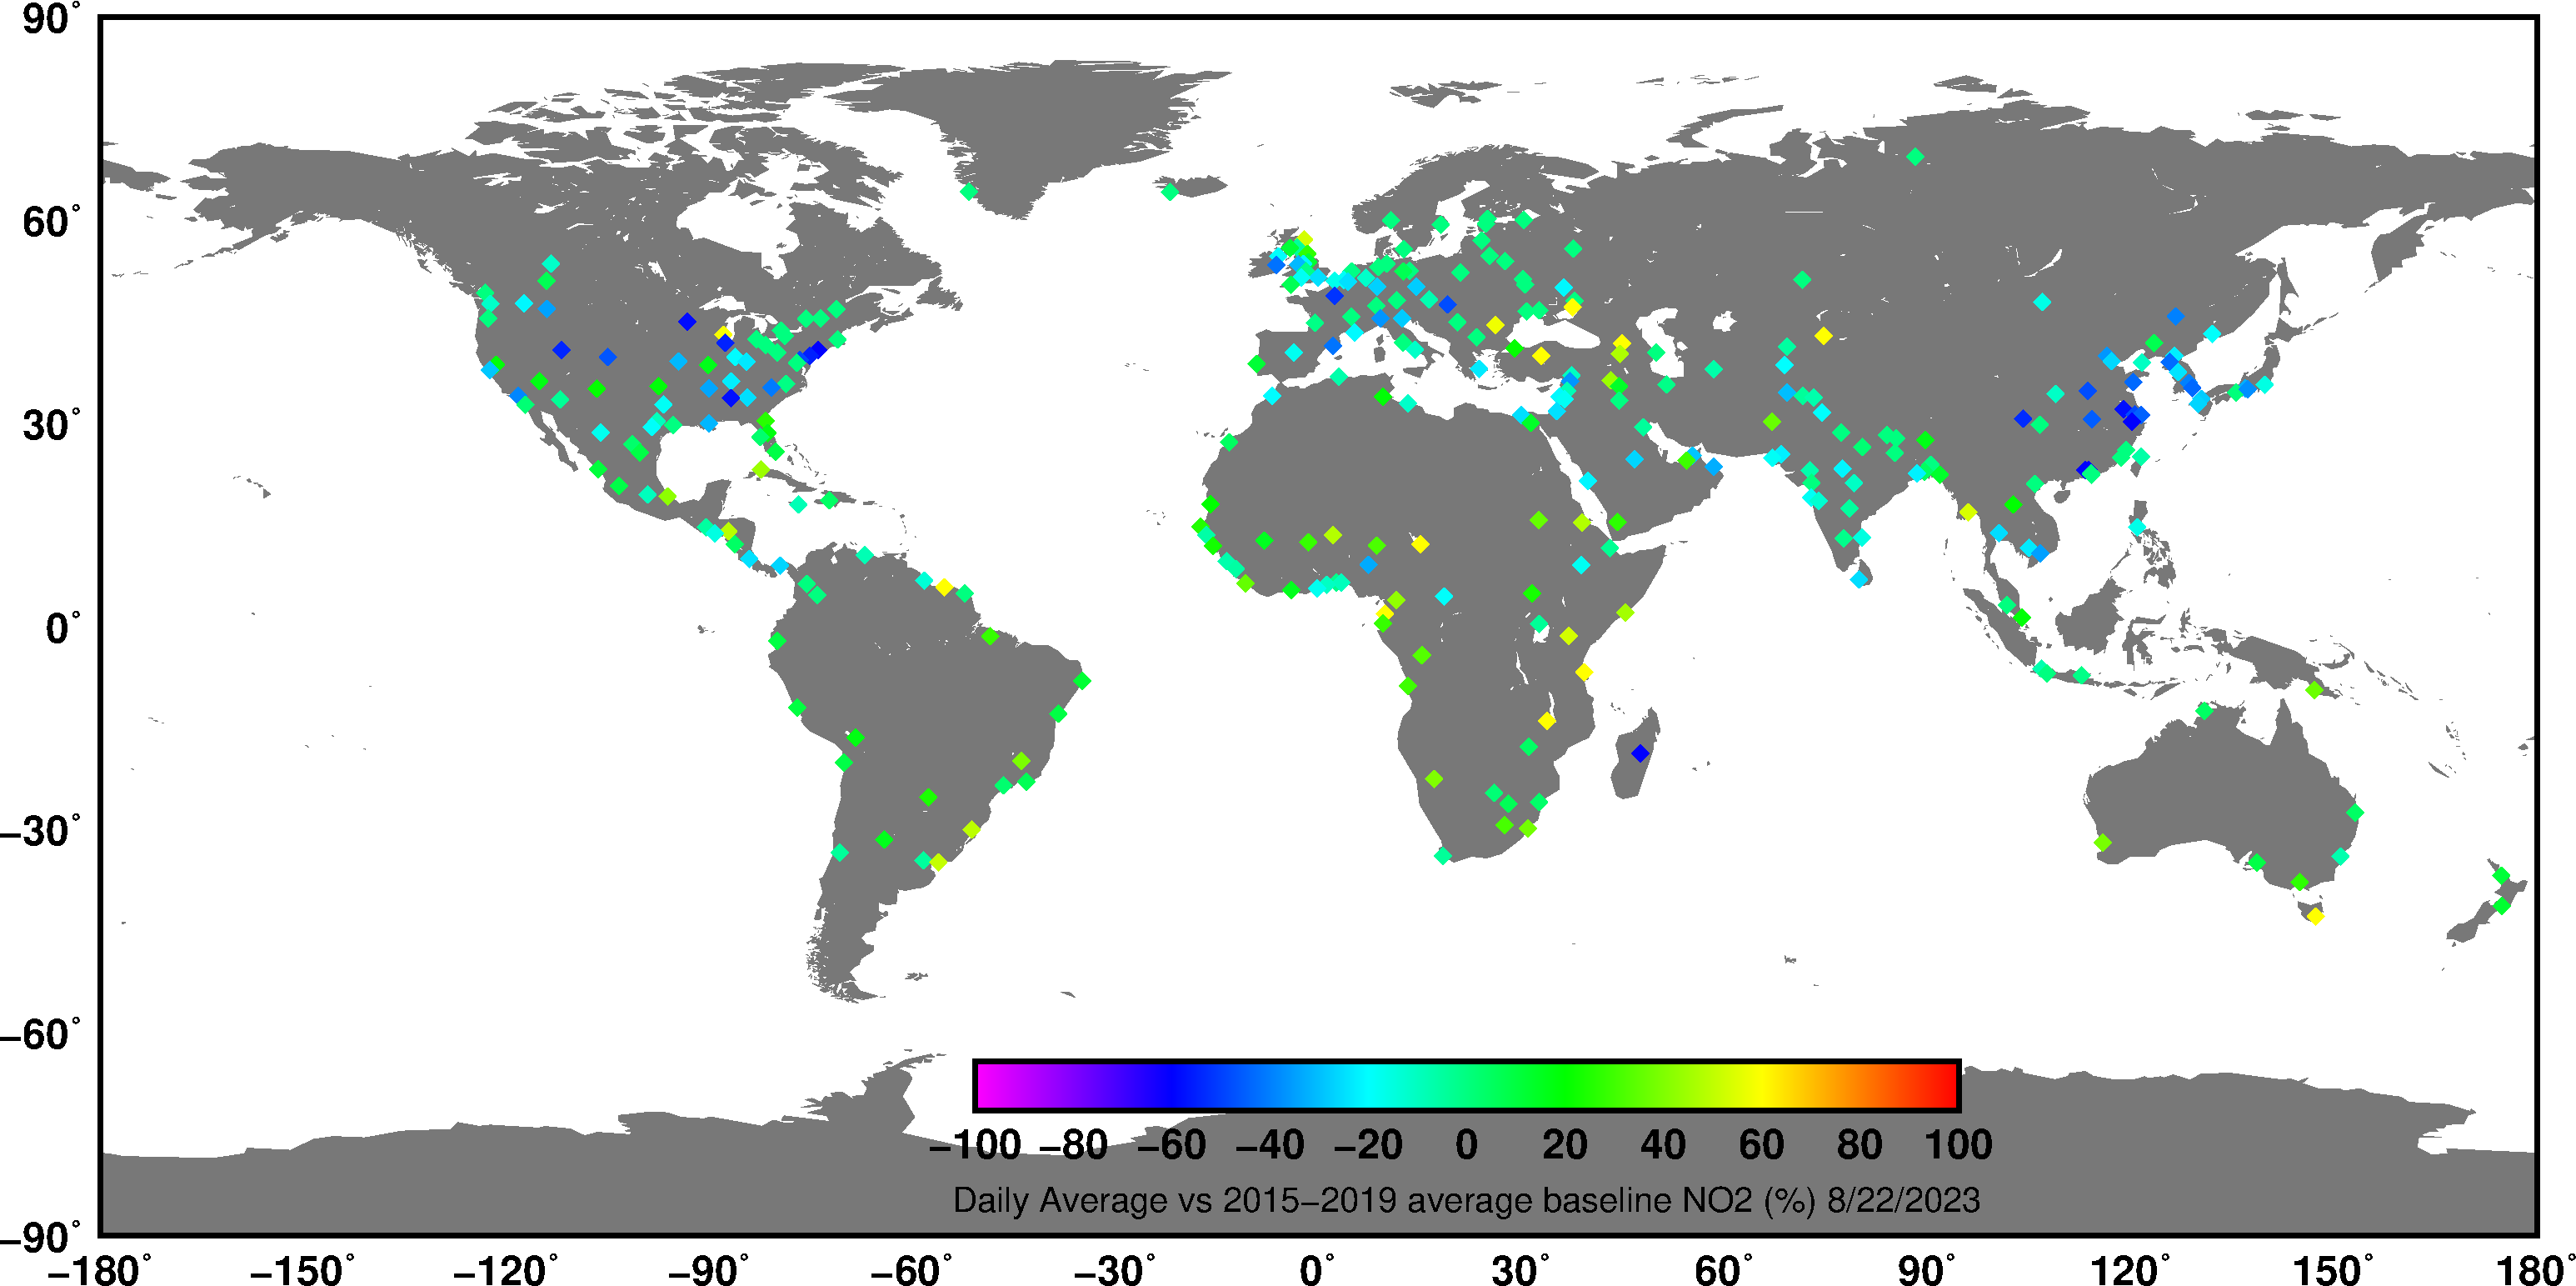 Clickable map of the world for nitrogen dioxide concentrations